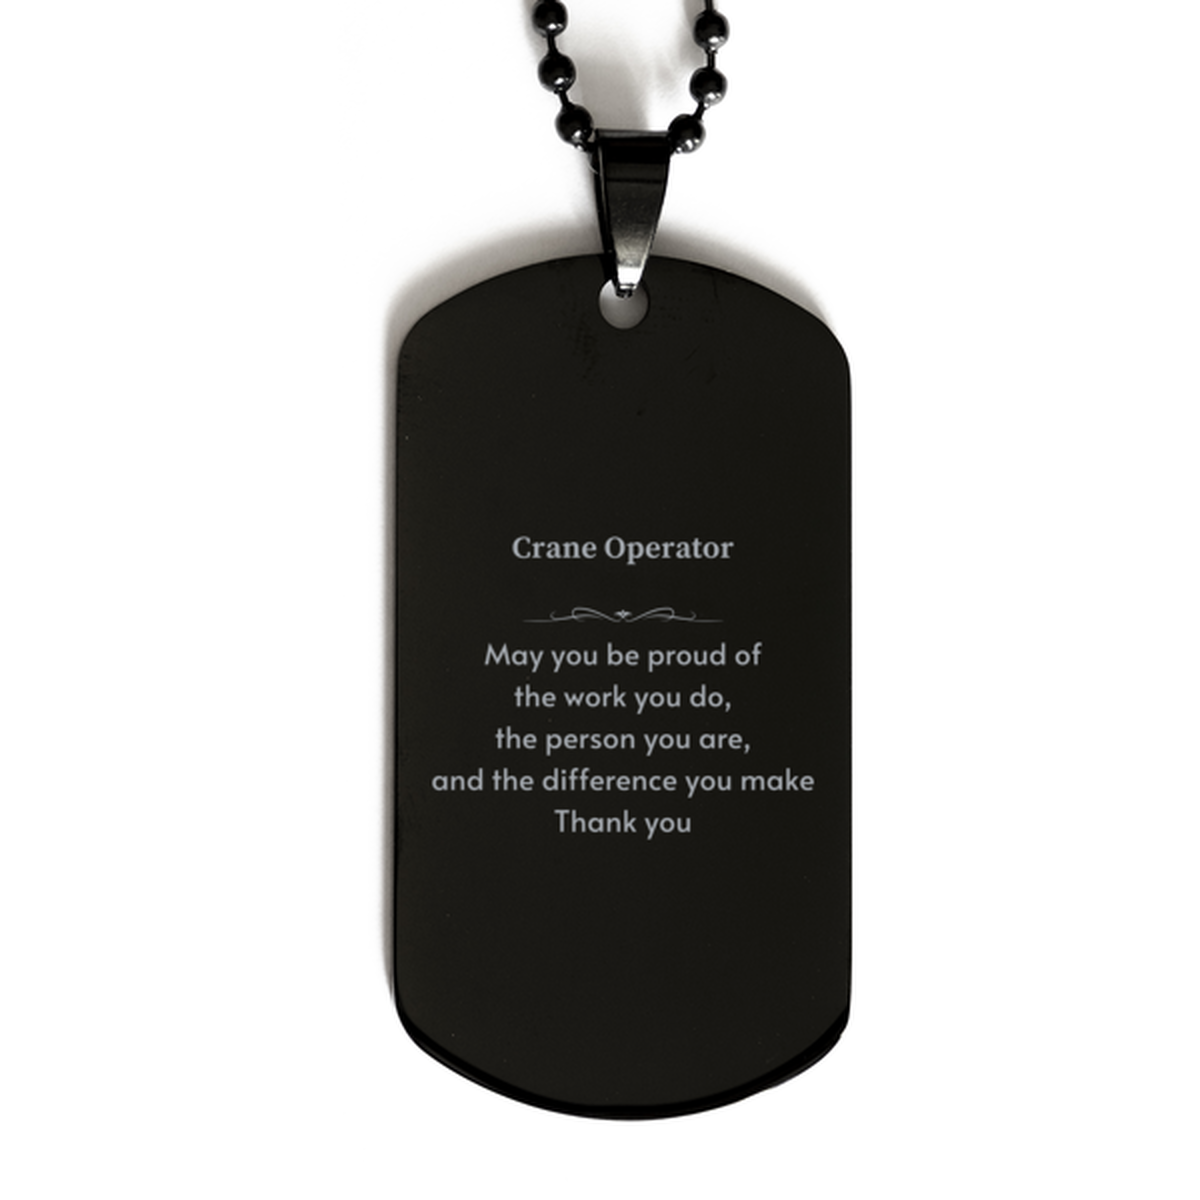 Heartwarming Black Dog Tag Retirement Coworkers Gifts for Crane Operator, Crane Operator May You be proud of the work you do, the person you are Gifts for Boss Men Women Friends